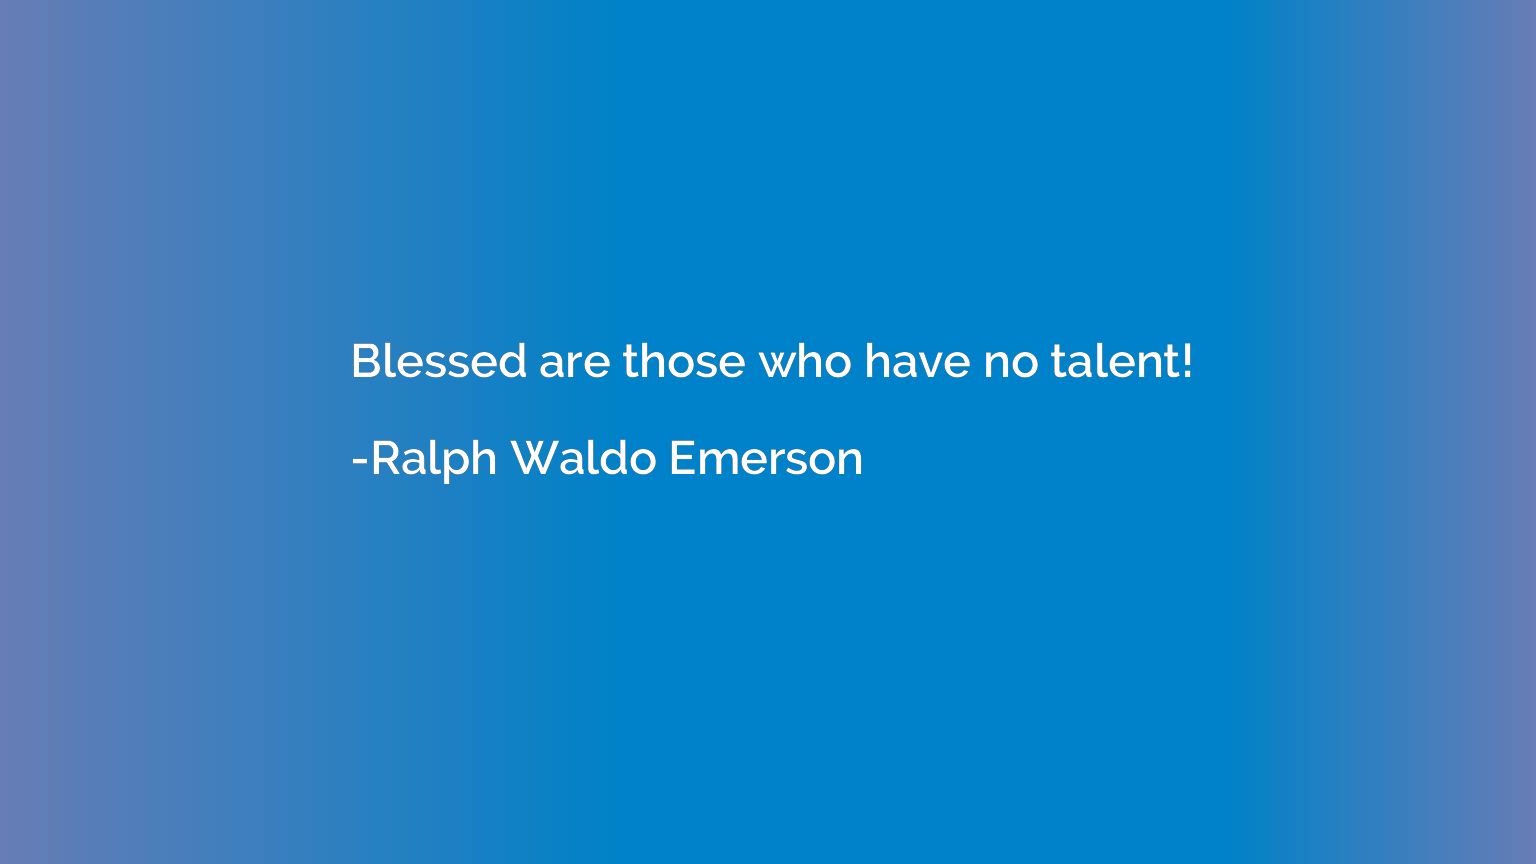 Blessed are those who have no talent!